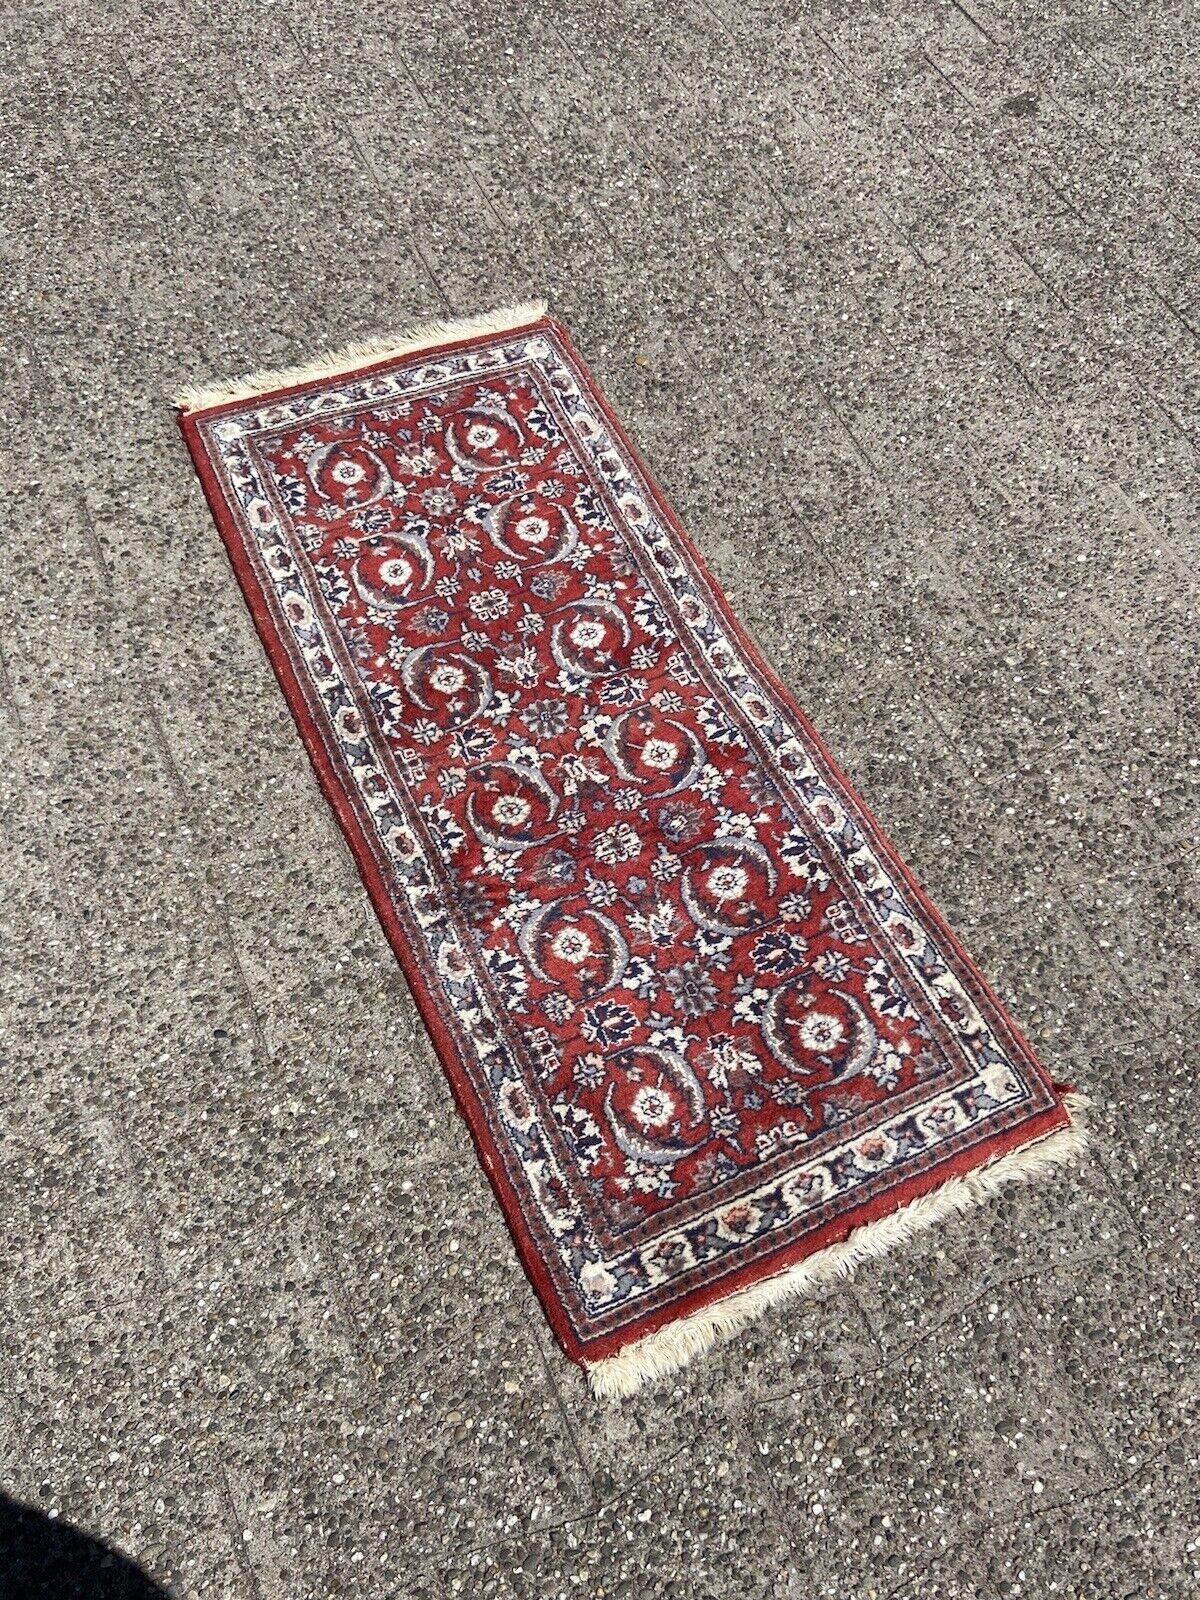 Handmade Vintage Persian Style Kashan Rug 1.5' x 3.7', 1970s - 1S21 For Sale 3